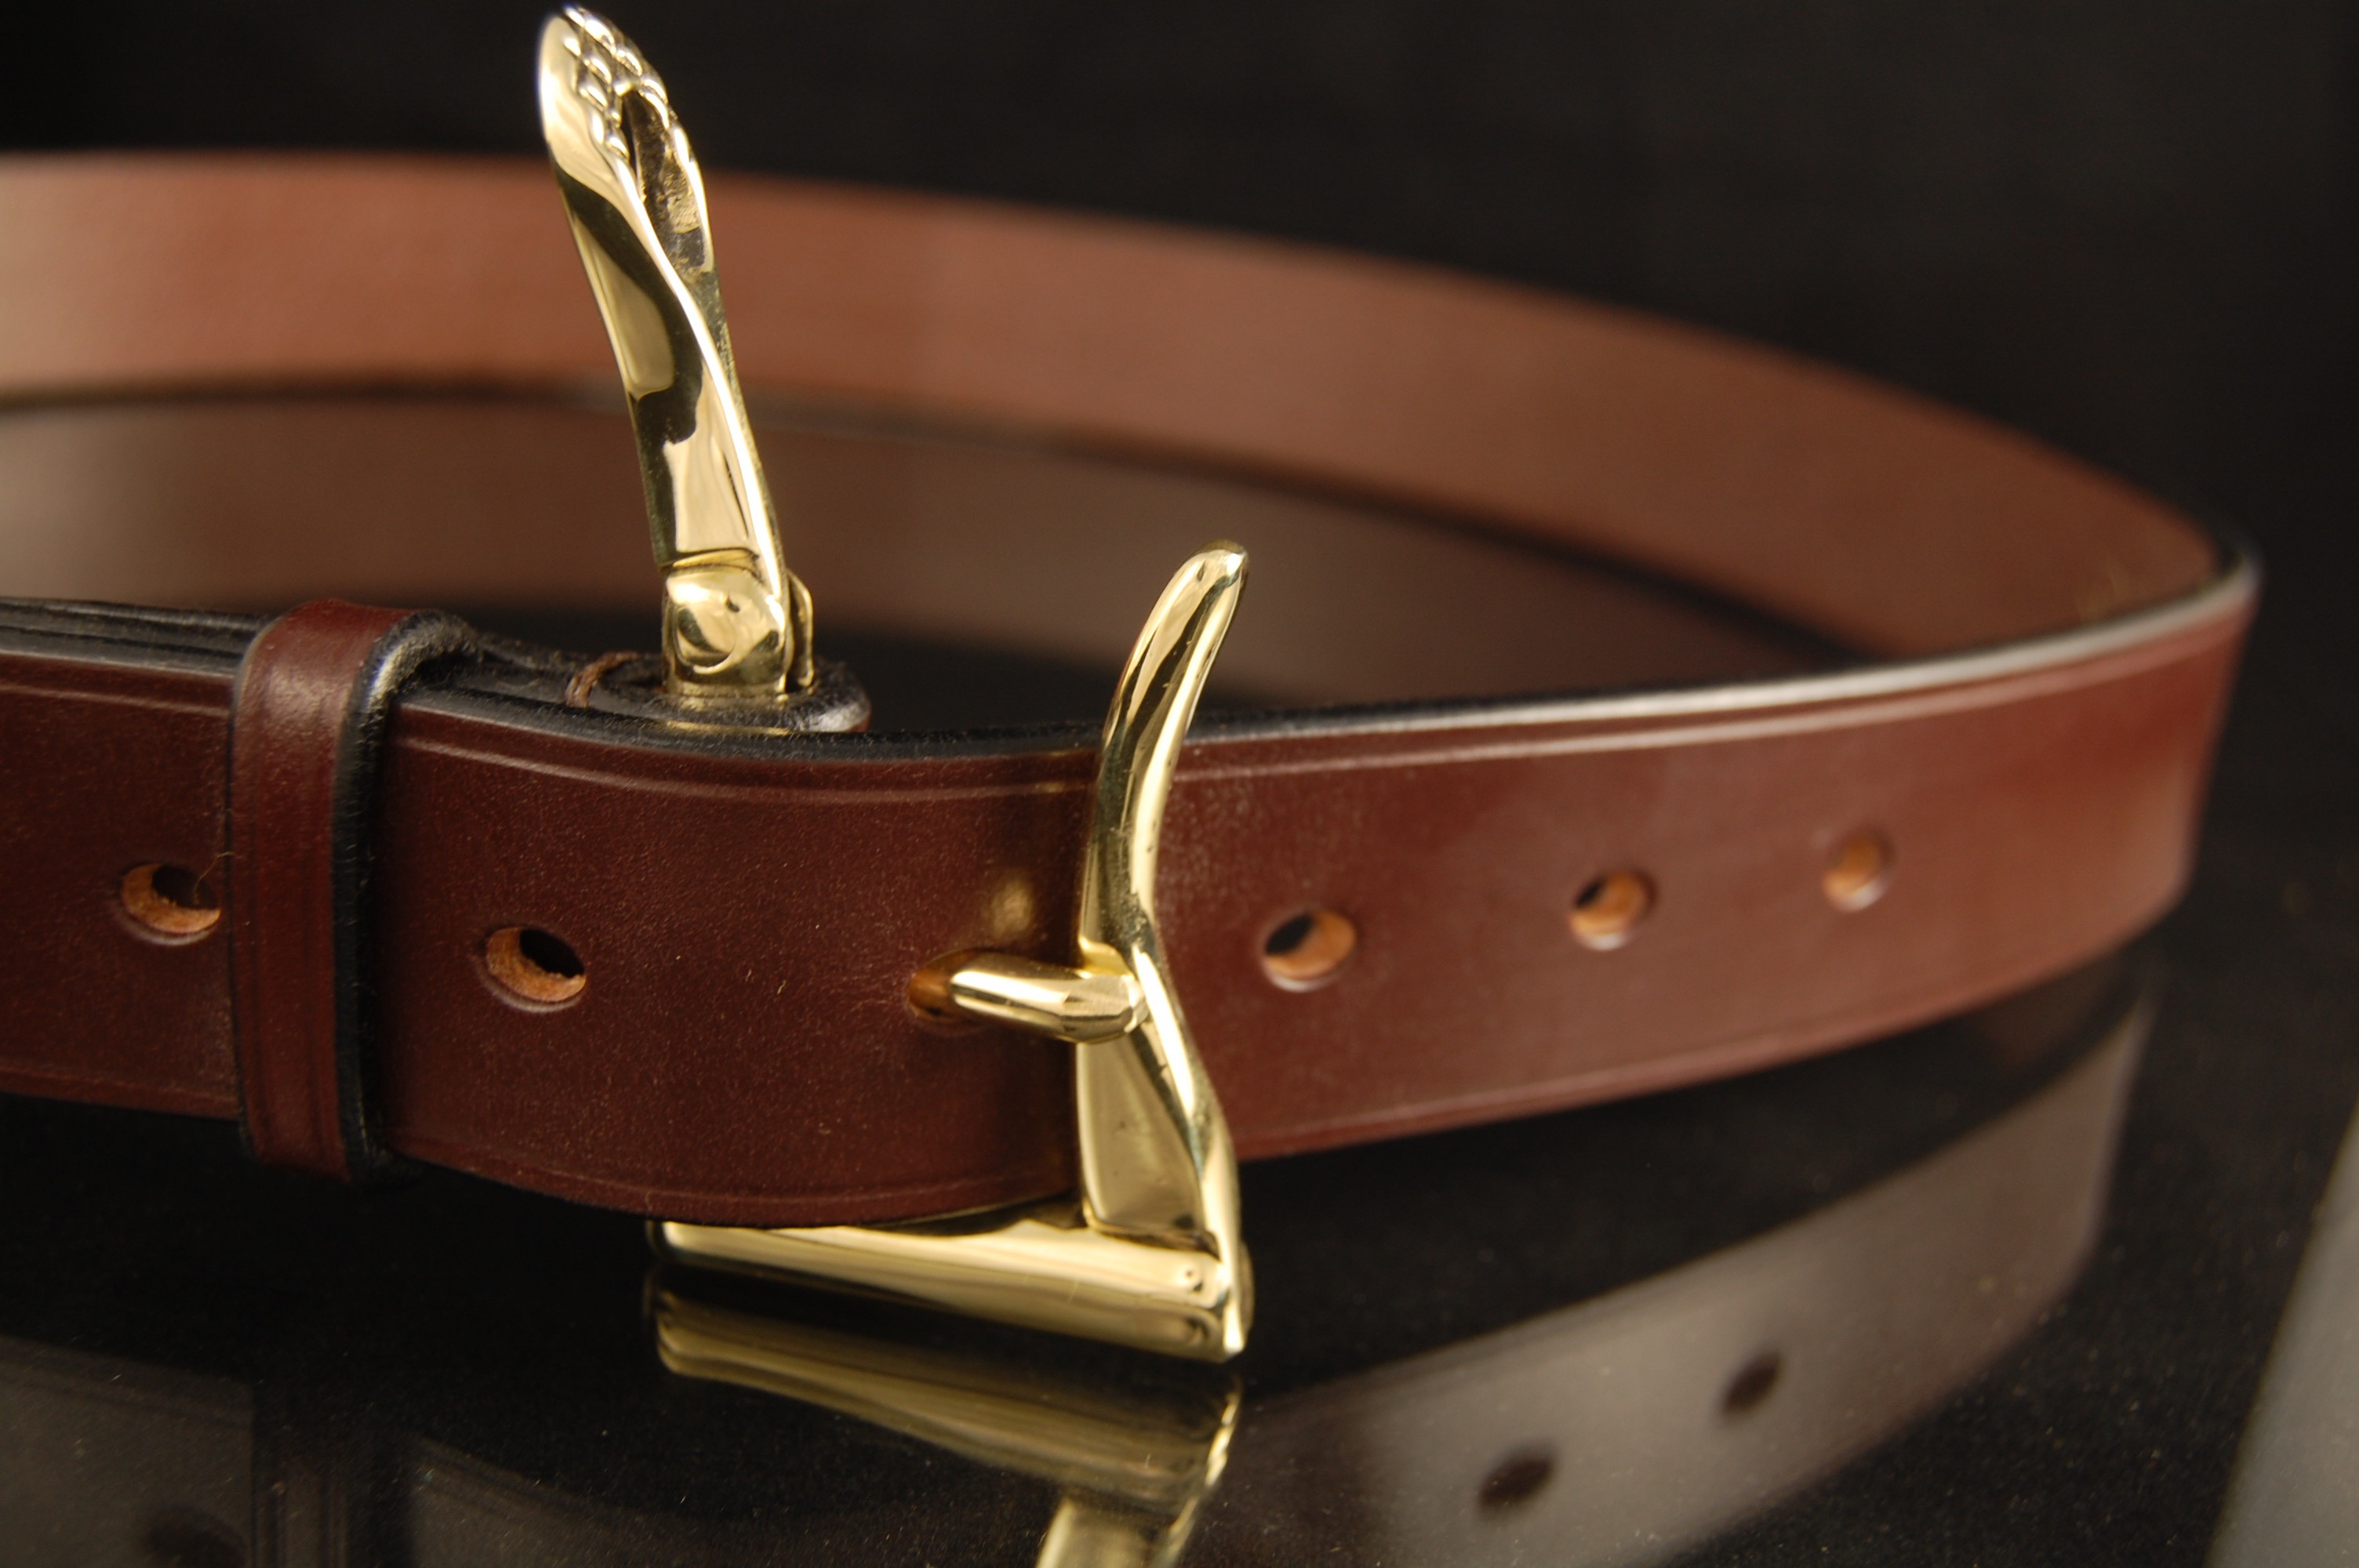 Equus Leather :: The Winchester Bridle Leather Belt - All Our Belts ...